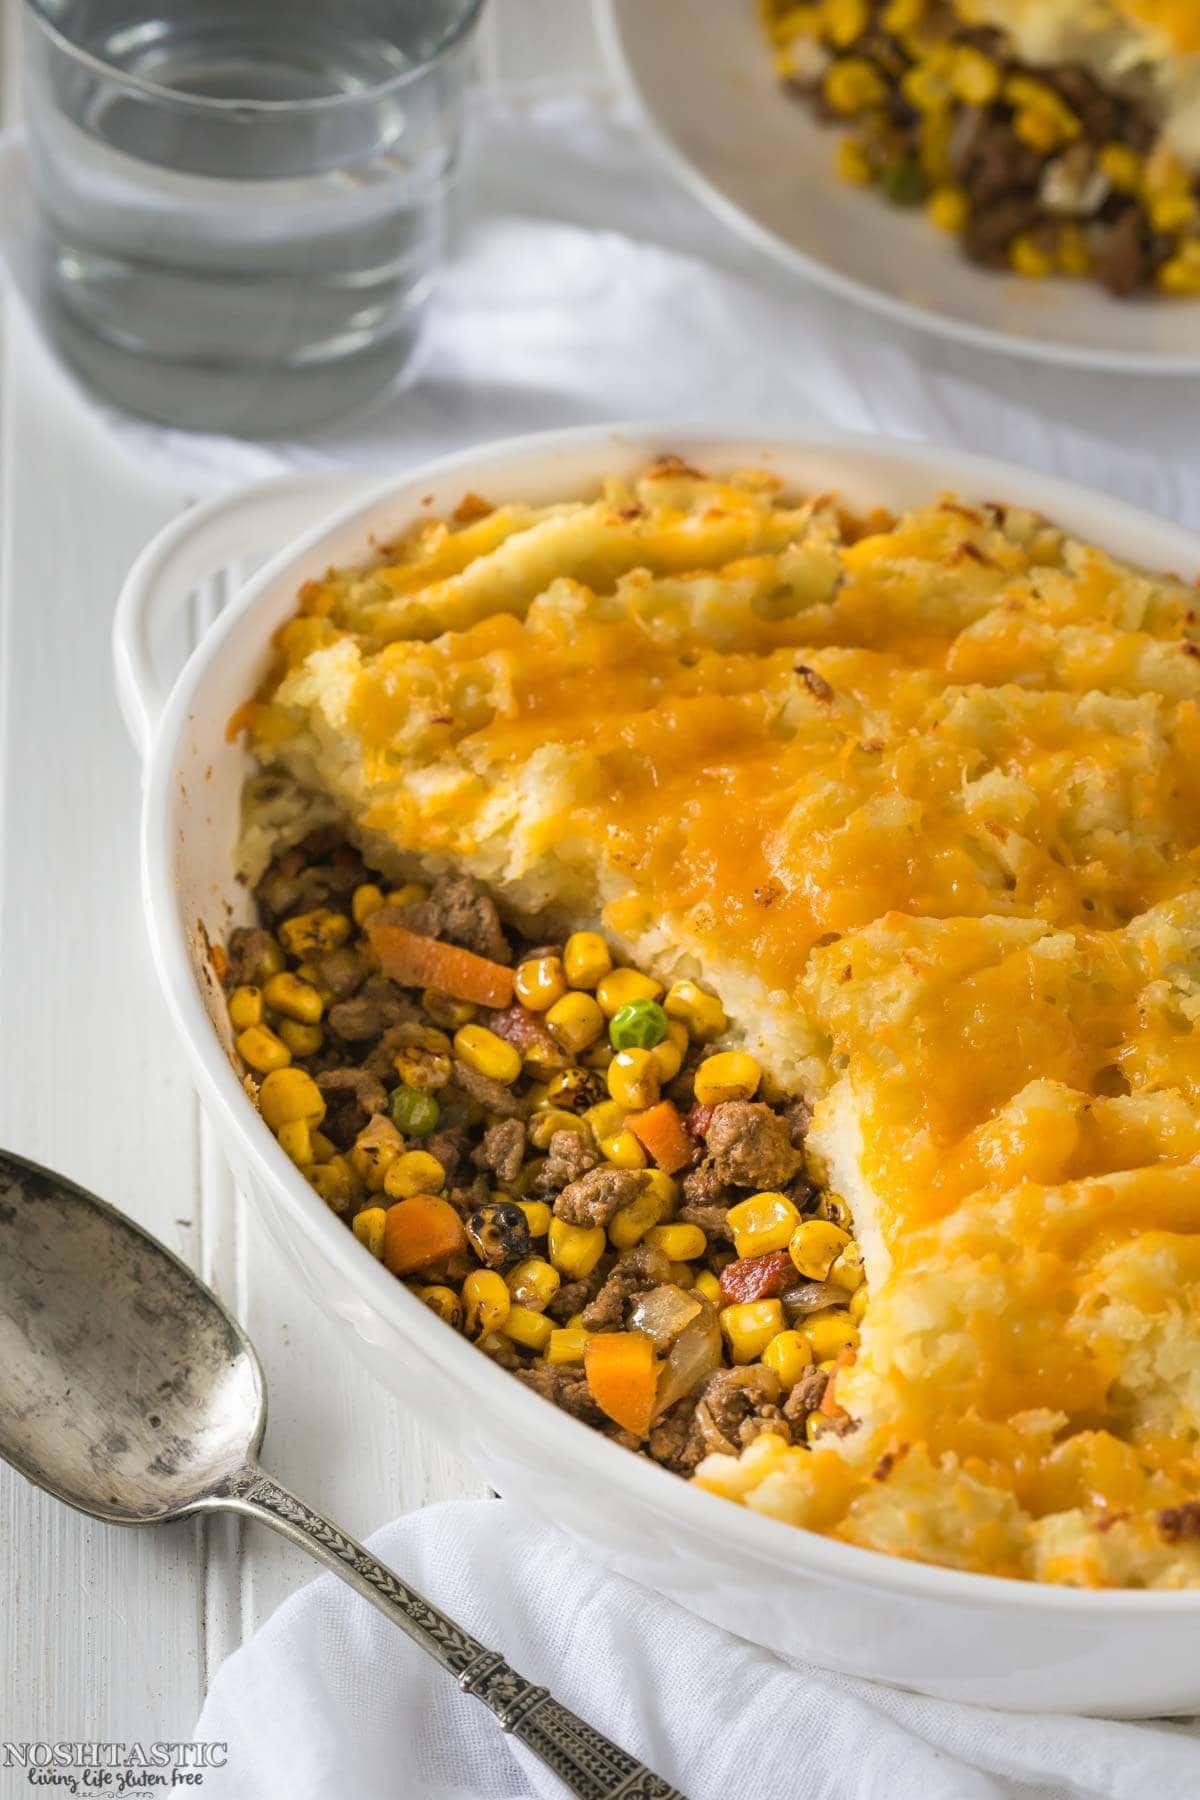 Healthy Taco Shepherd's Pie recipe with the best flavors! Paleo, whole30 and gluten free, made with ground beef and spices, cheese is optional.